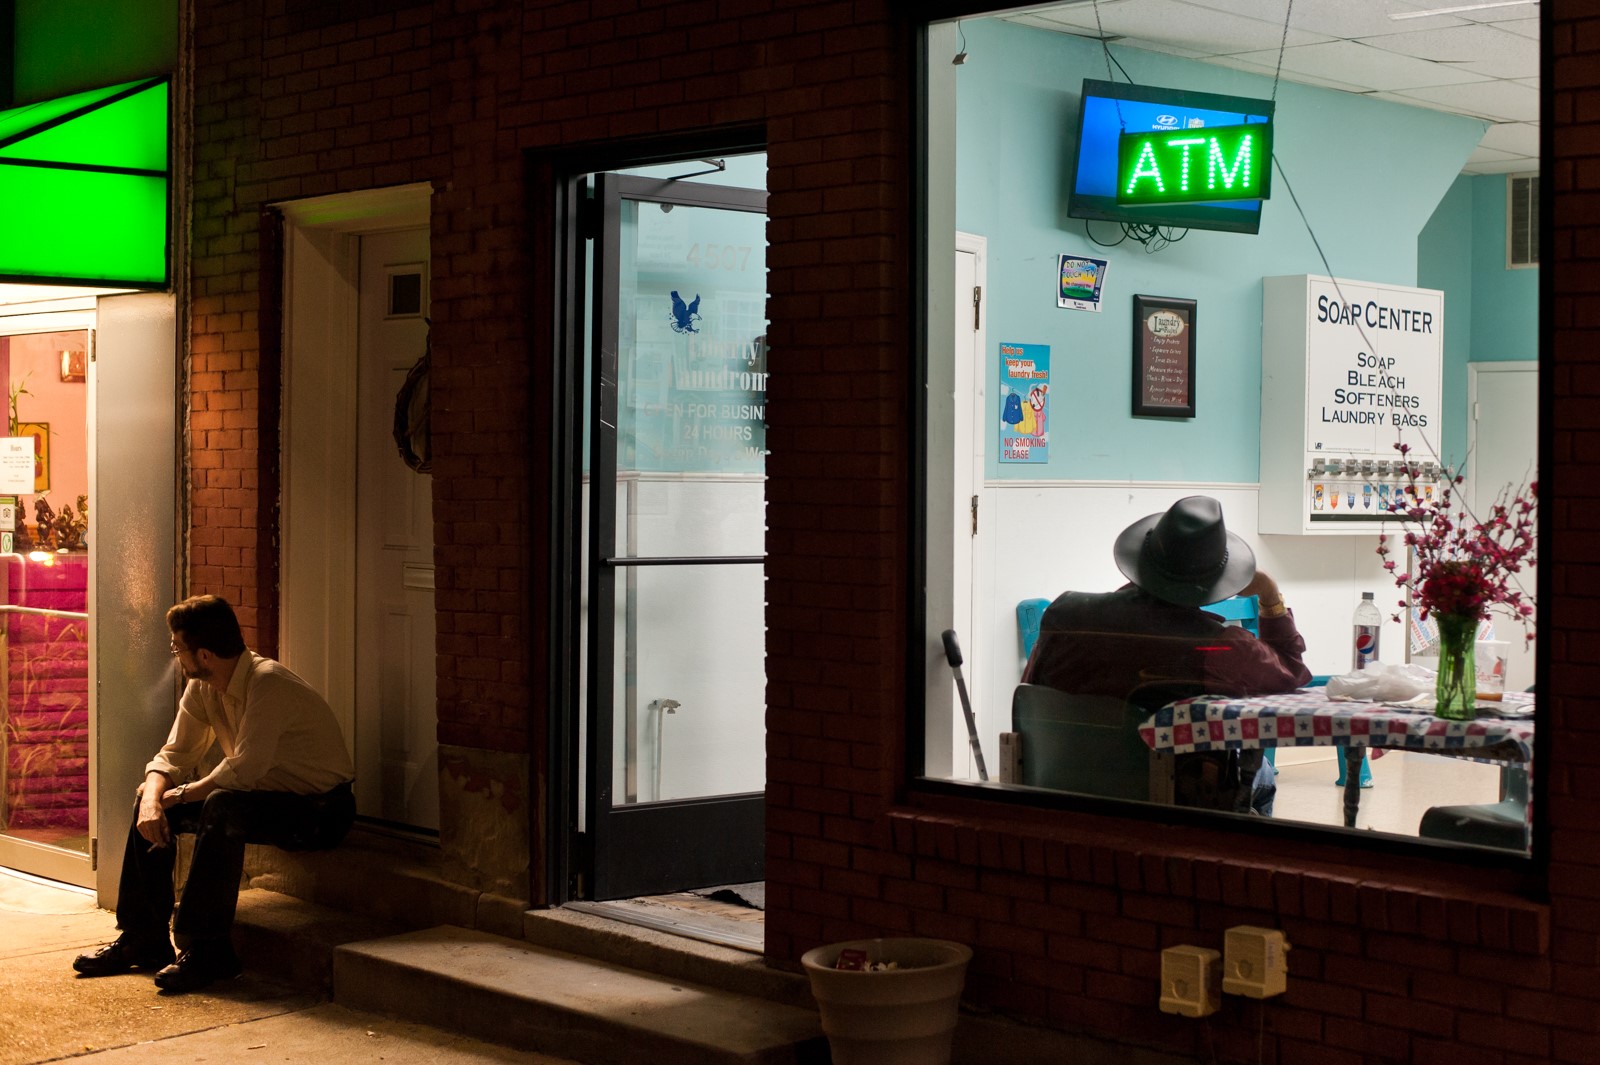 A man, smoking, sits on a stoop at night outside a well-lit laundromat.